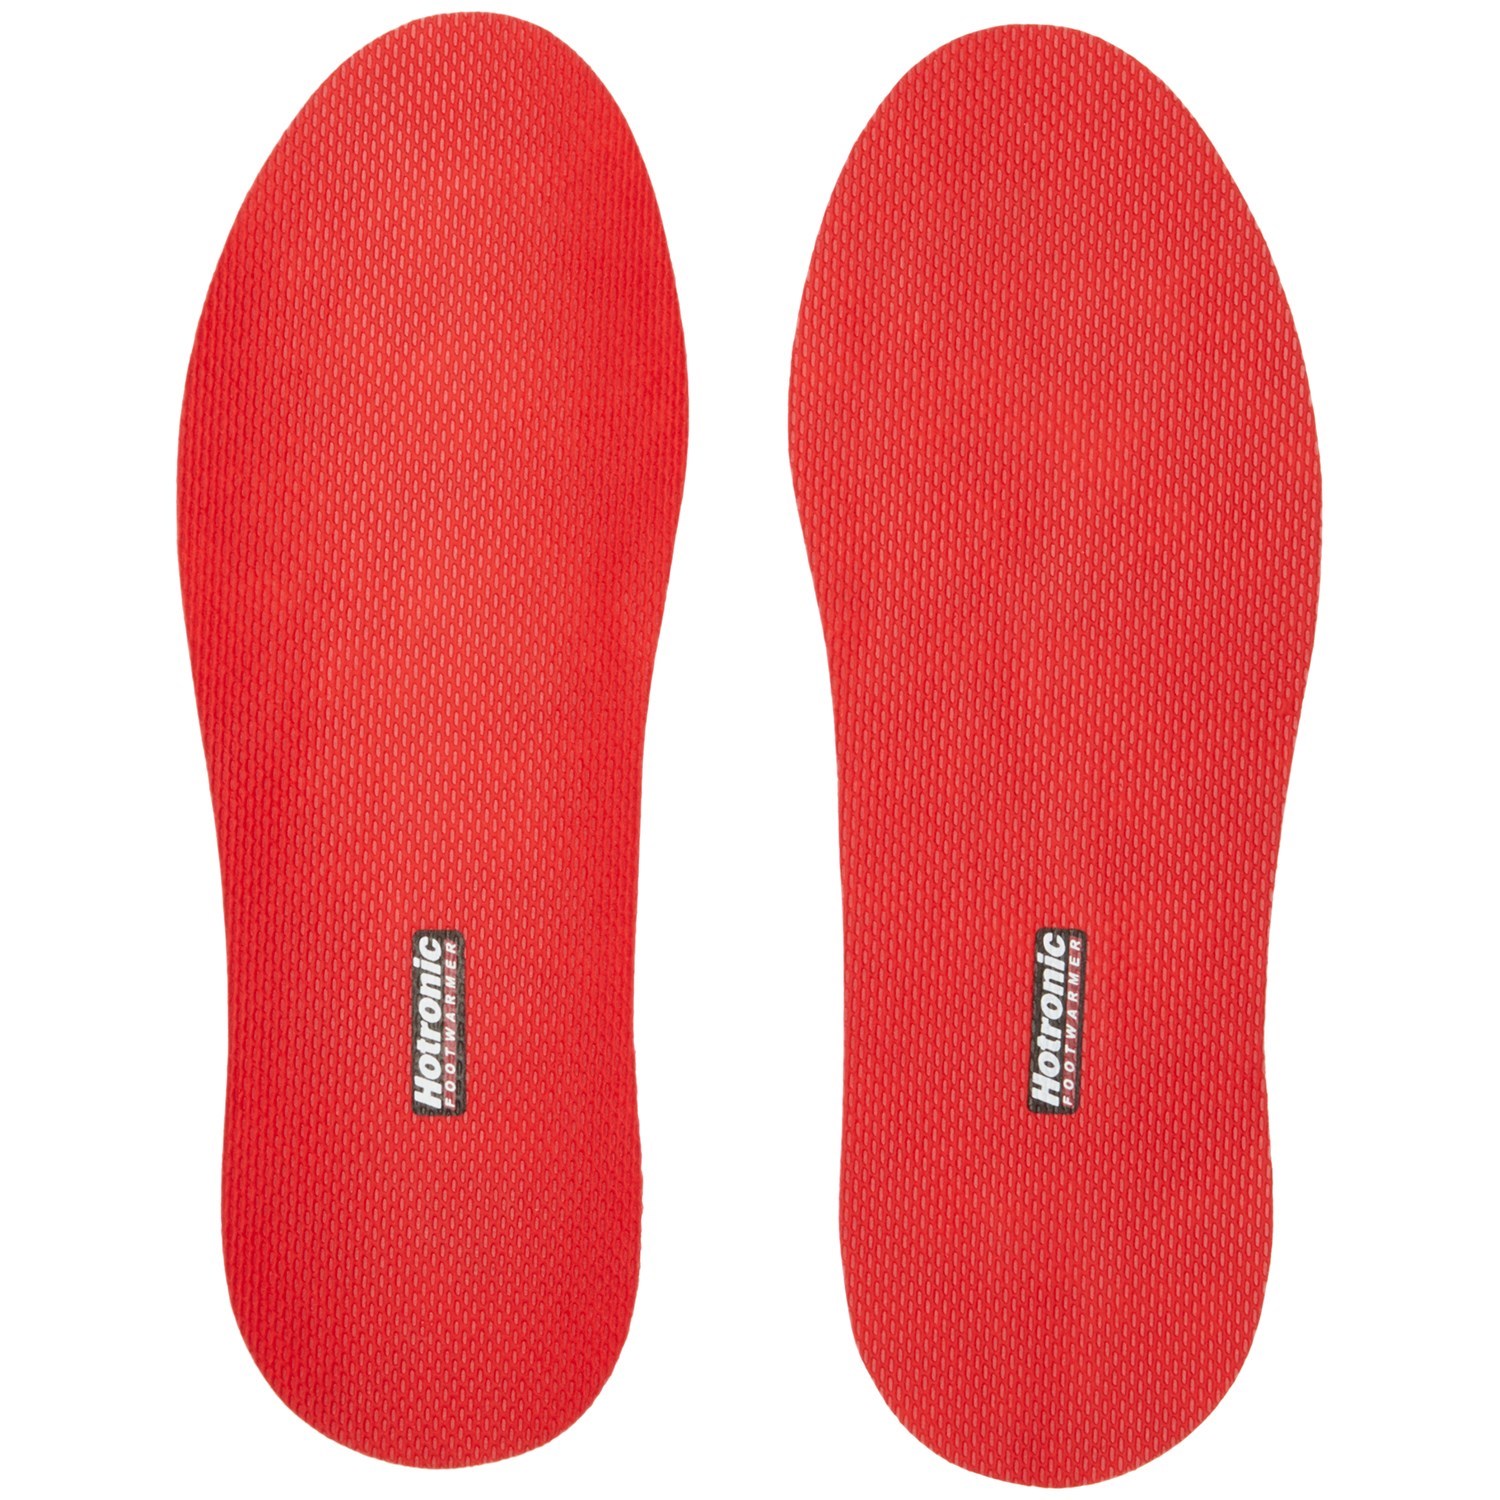 hotronic heated insoles